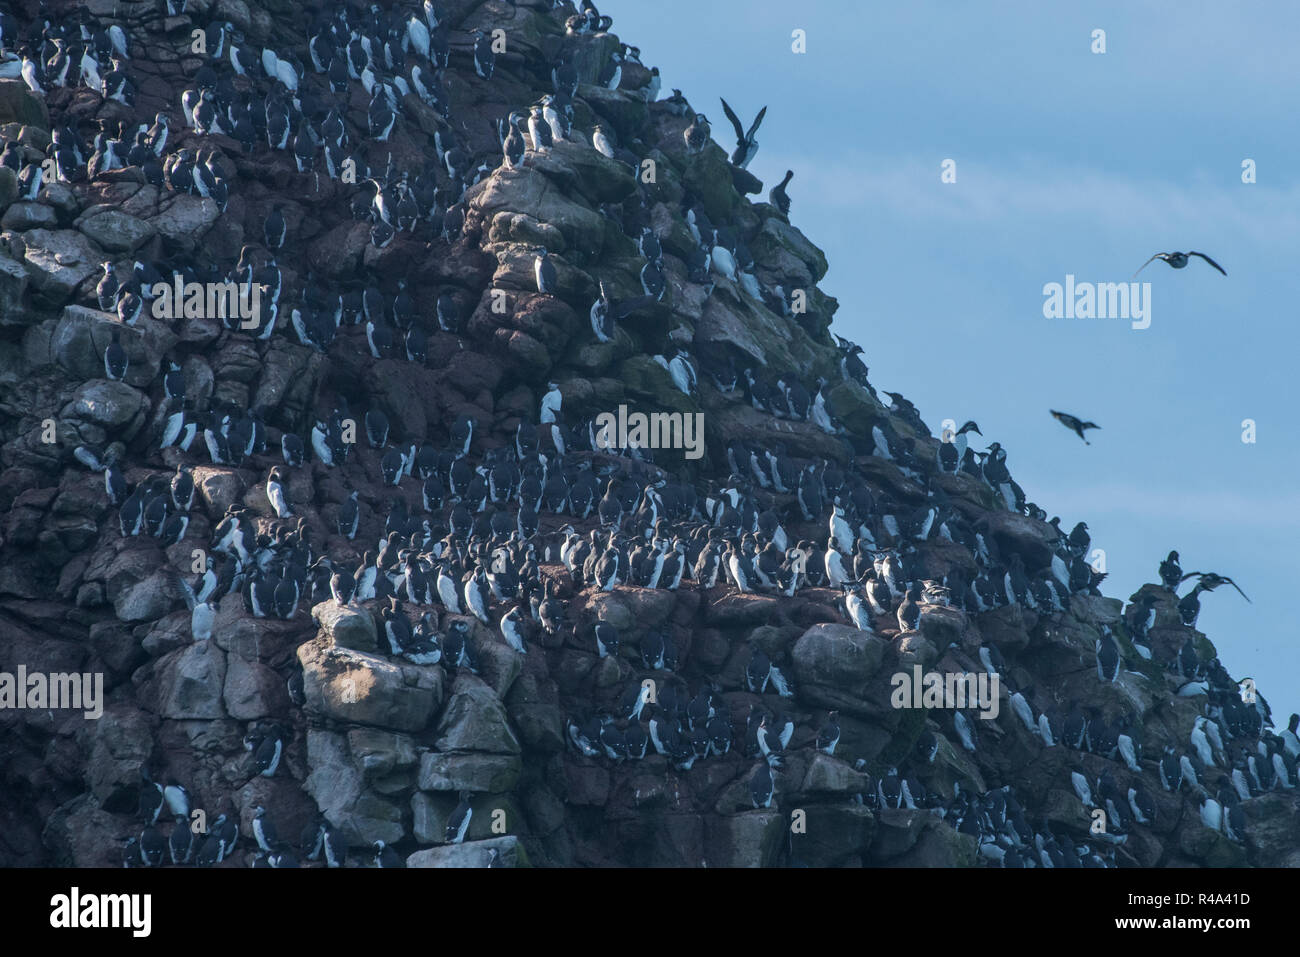 Common murres (Uria aalge) line the cliffs of the Farallon Islands in the Pacific Ocean. Stock Photo